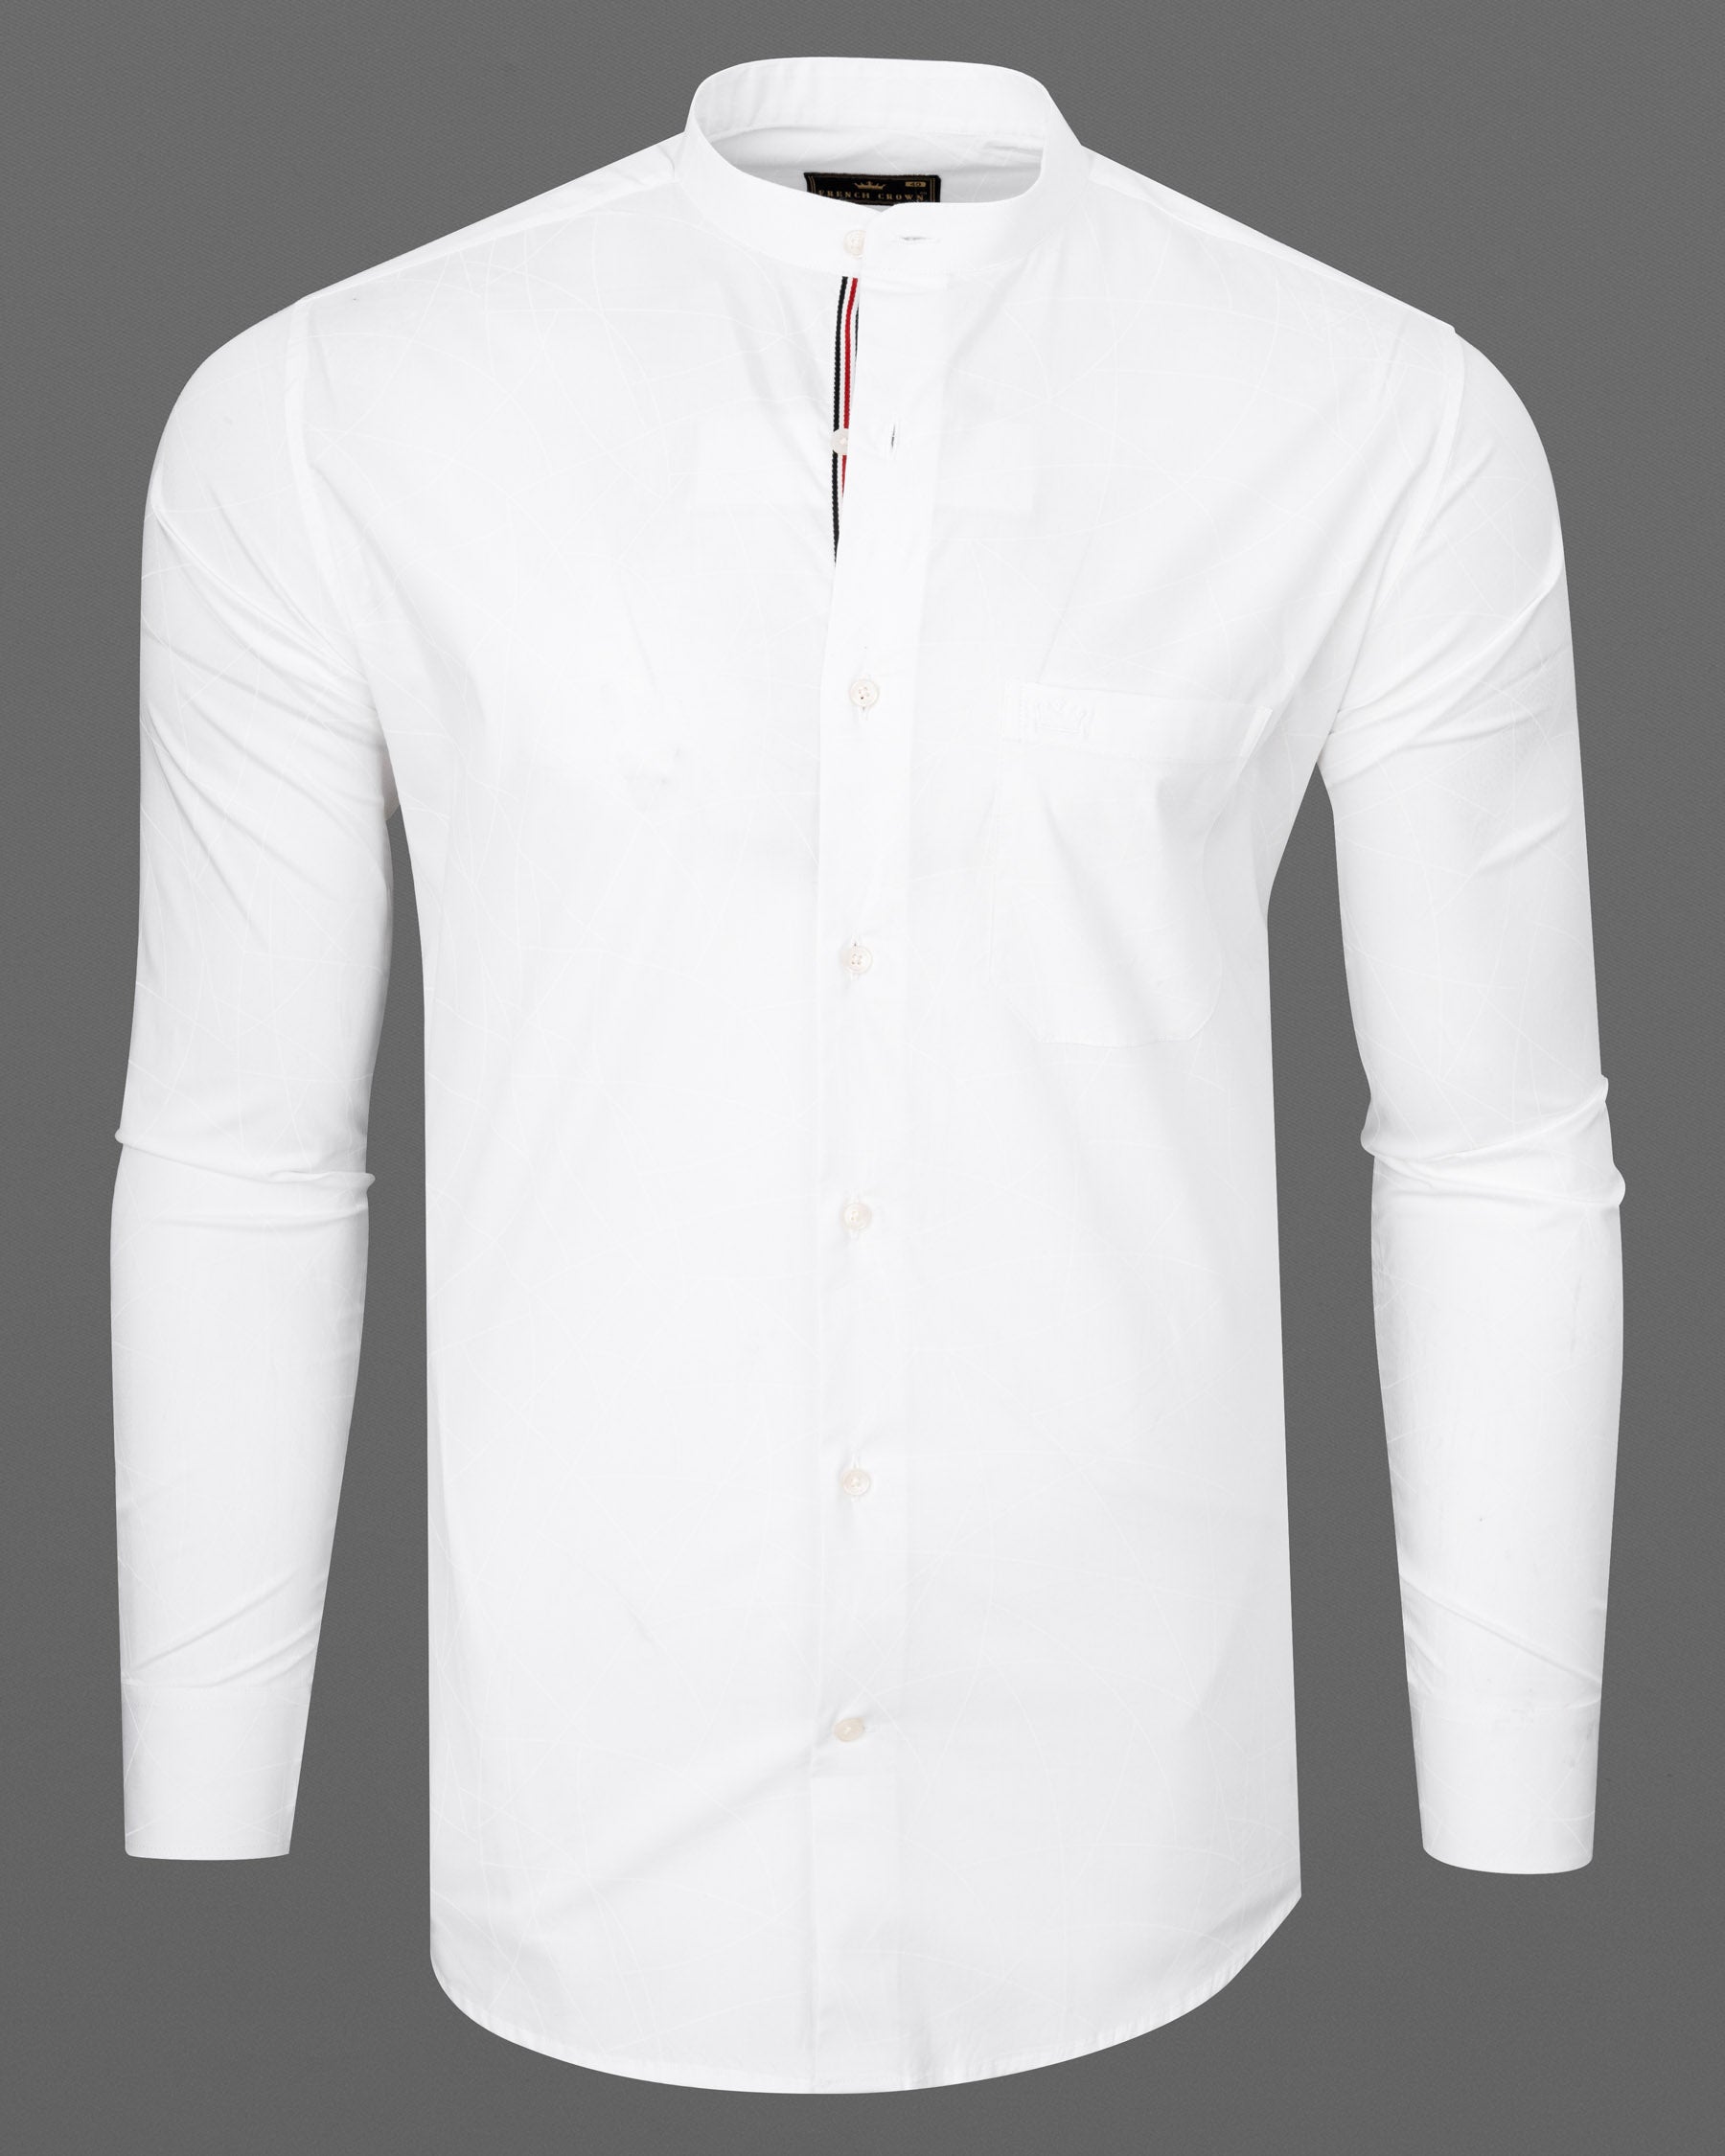 Bright White subtle abstract lines Printed Super Soft Premium Cotton Shirt 6828-M-P-38,6828-M-P-38,6828-M-P-39,6828-M-P-39,6828-M-P-40,6828-M-P-40,6828-M-P-42,6828-M-P-42,6828-M-P-44,6828-M-P-44,6828-M-P-46,6828-M-P-46,6828-M-P-48,6828-M-P-48,6828-M-P-50,6828-M-P-50,6828-M-P-52,6828-M-P-52